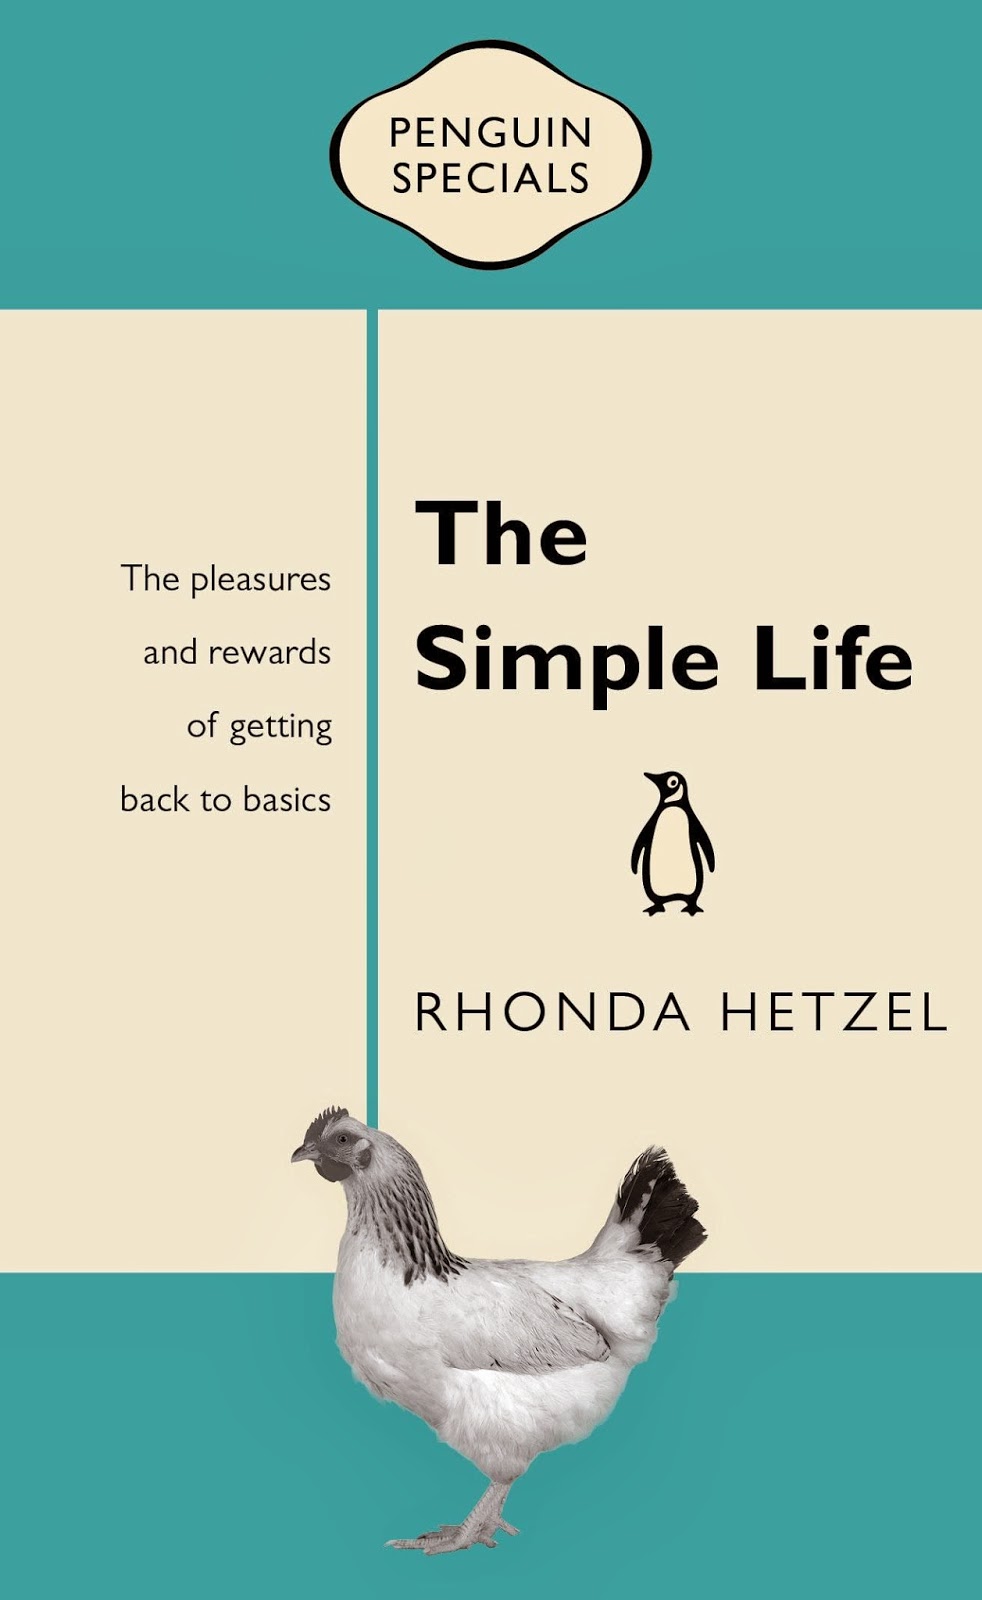 The Simple Life is published today